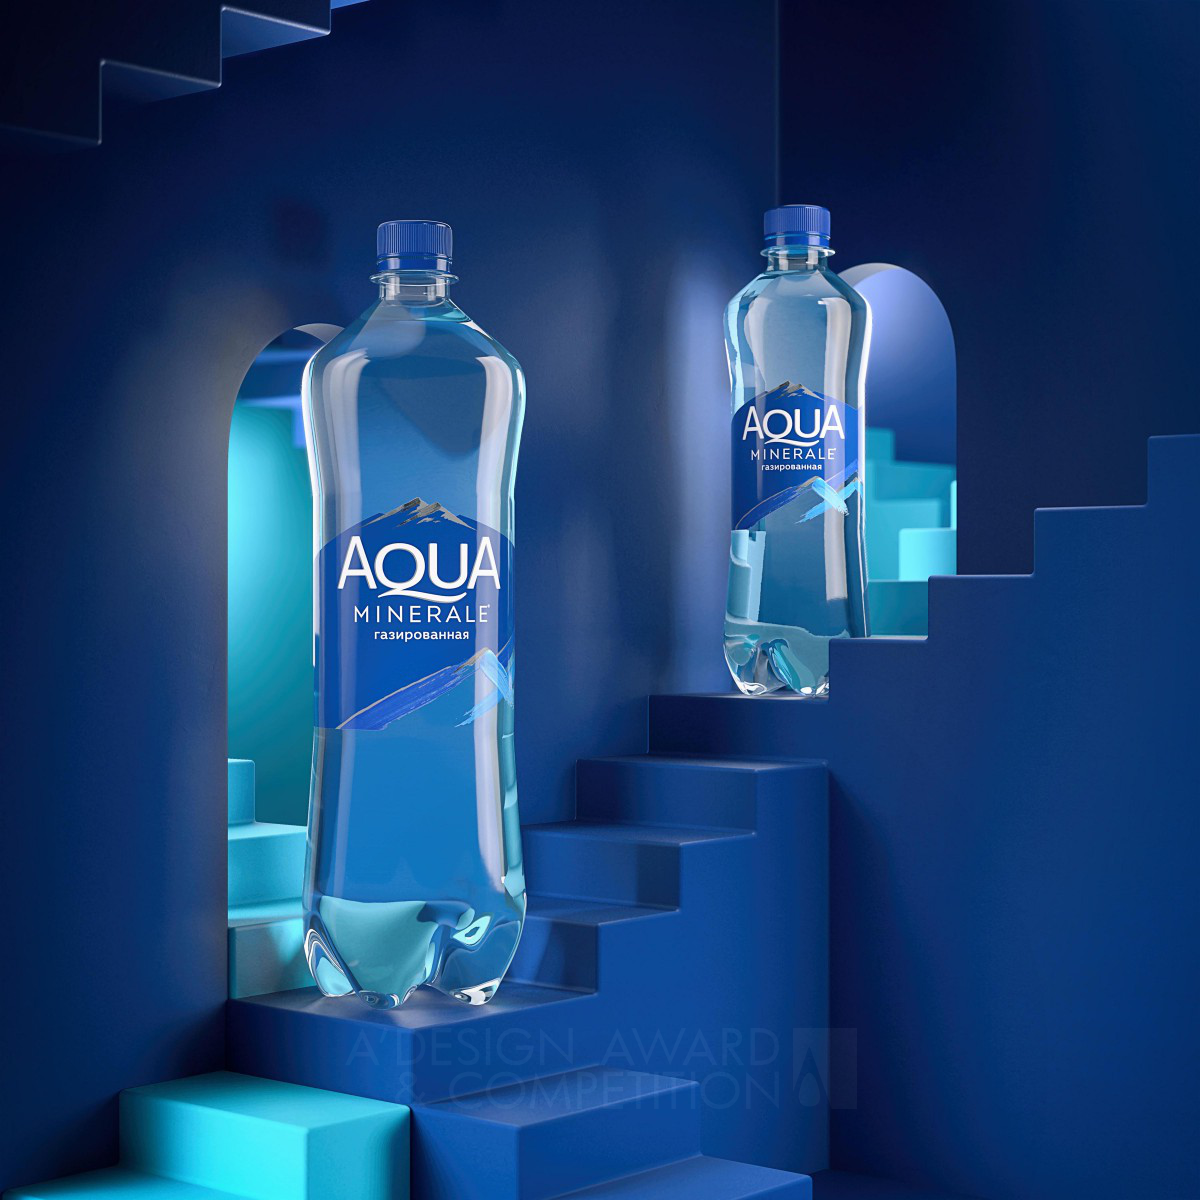 PepsiCo Design and Innovation wins Silver at the prestigious A' Packaging Design Award with Aqua Minerale Redesign Beverage Packaging.